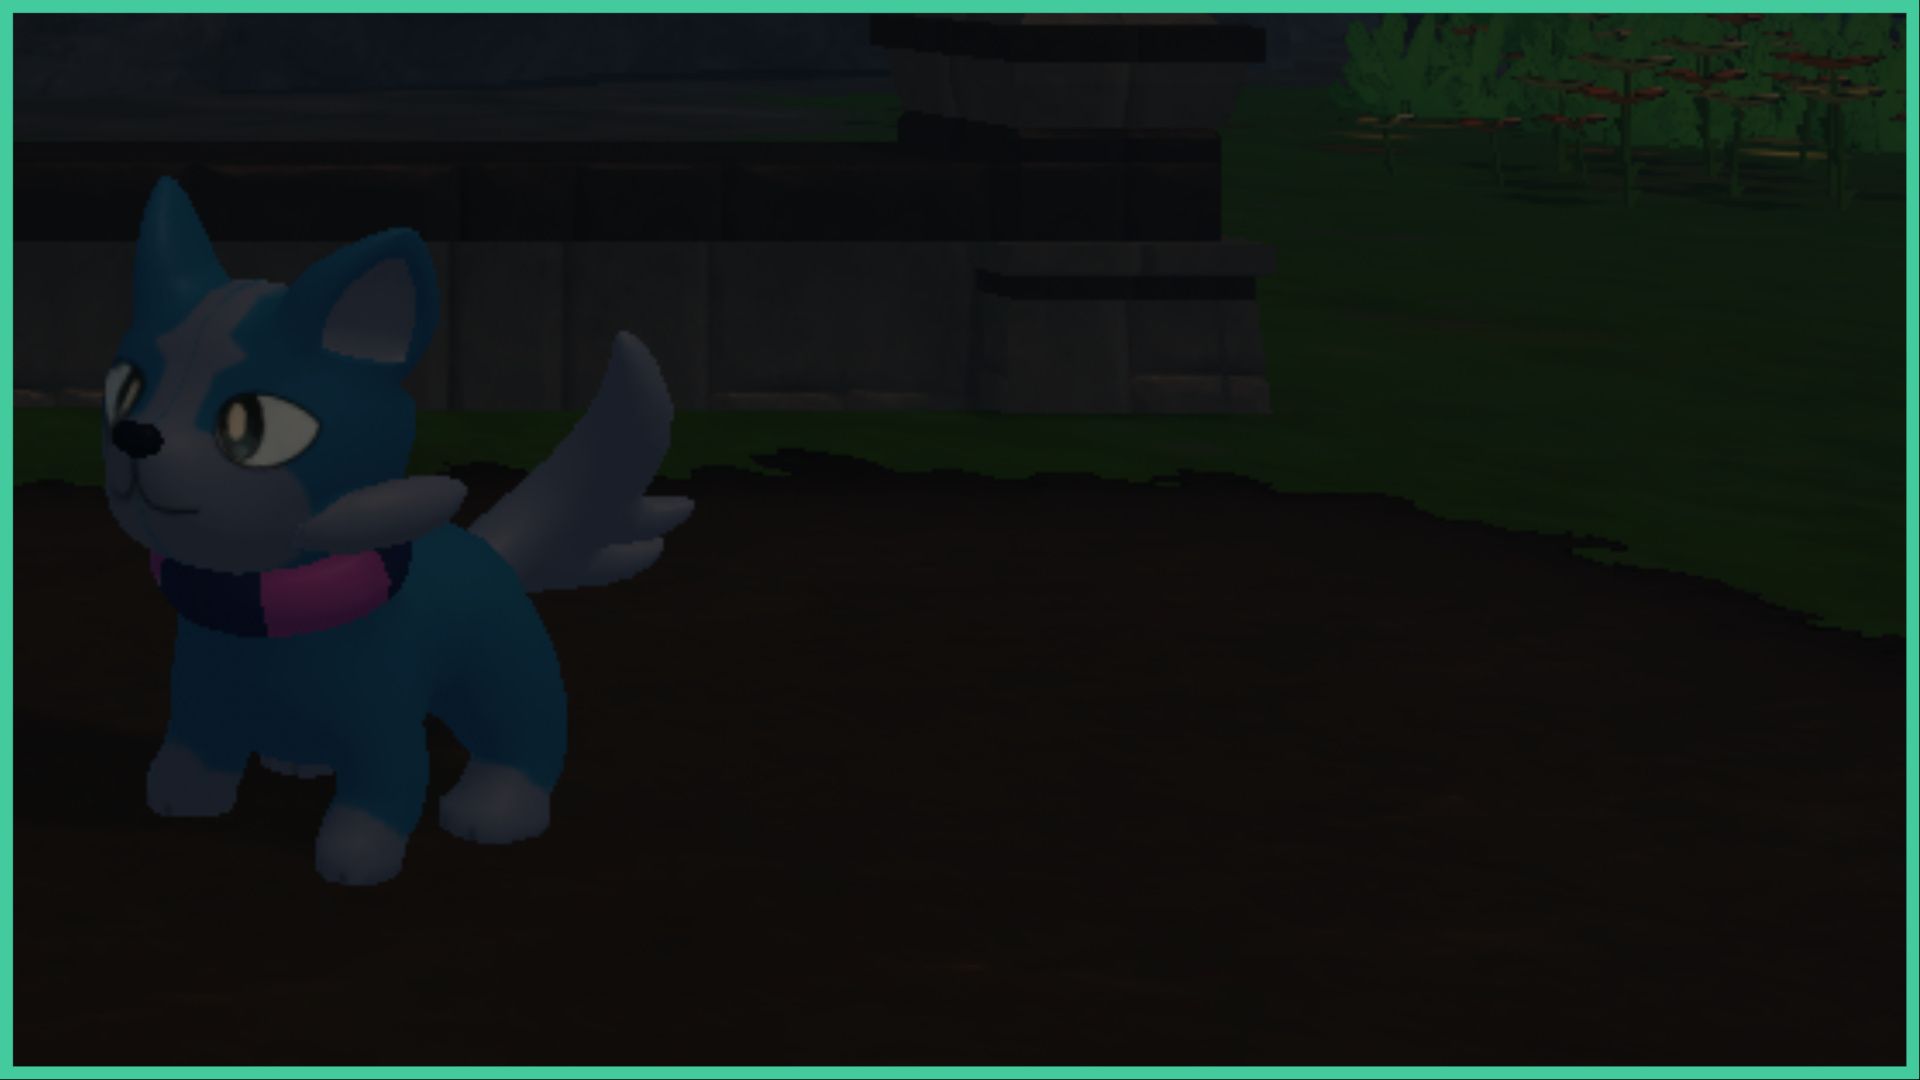 feature image for our tales of tanorio chewaqua evolution guide, the image features a screenshot of chewaqua as it stands in the dirt, surrounded by grass, with some plants in the distance, chewaqua looks like a blue puppy with a fluffy tail and a blue and pink striped collar